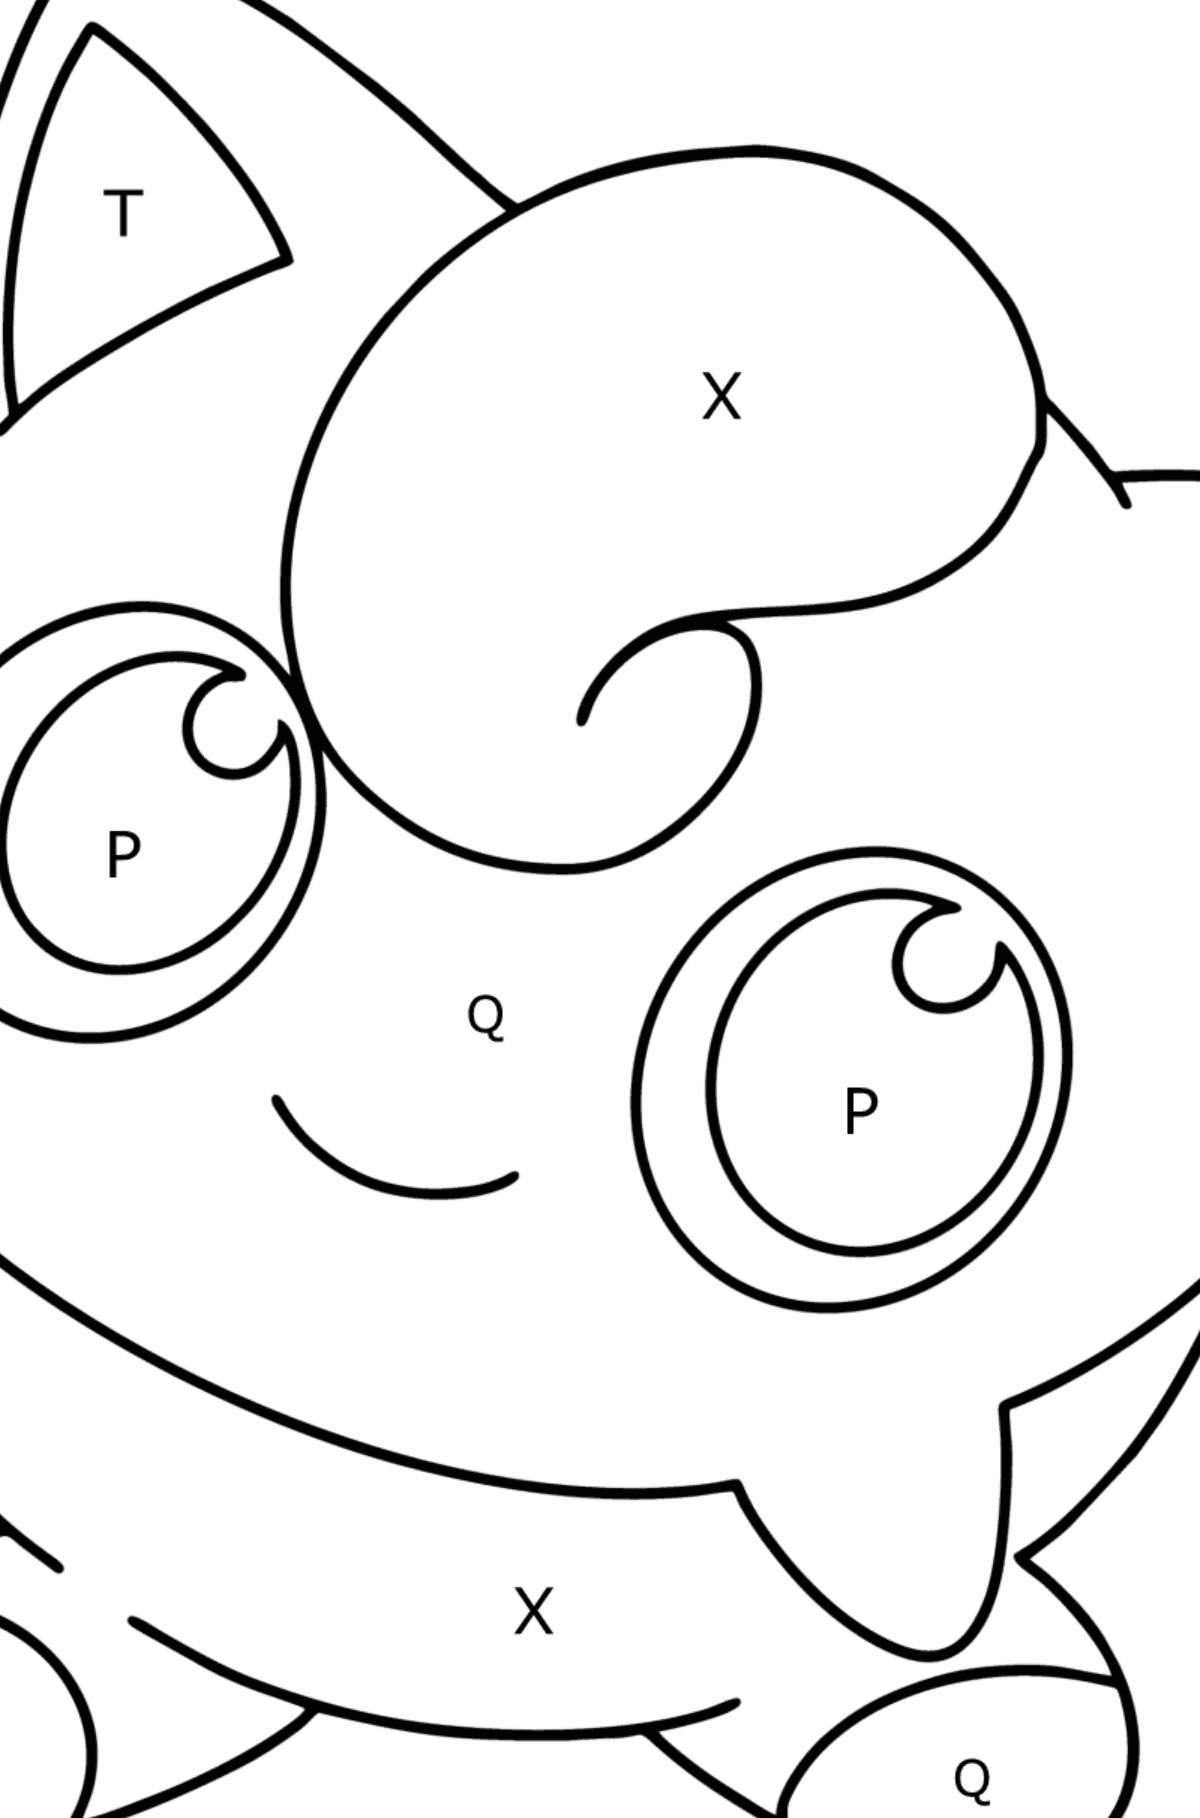 Coloring page Pokémon Go Jigglypuff - Coloring by Letters for Kids